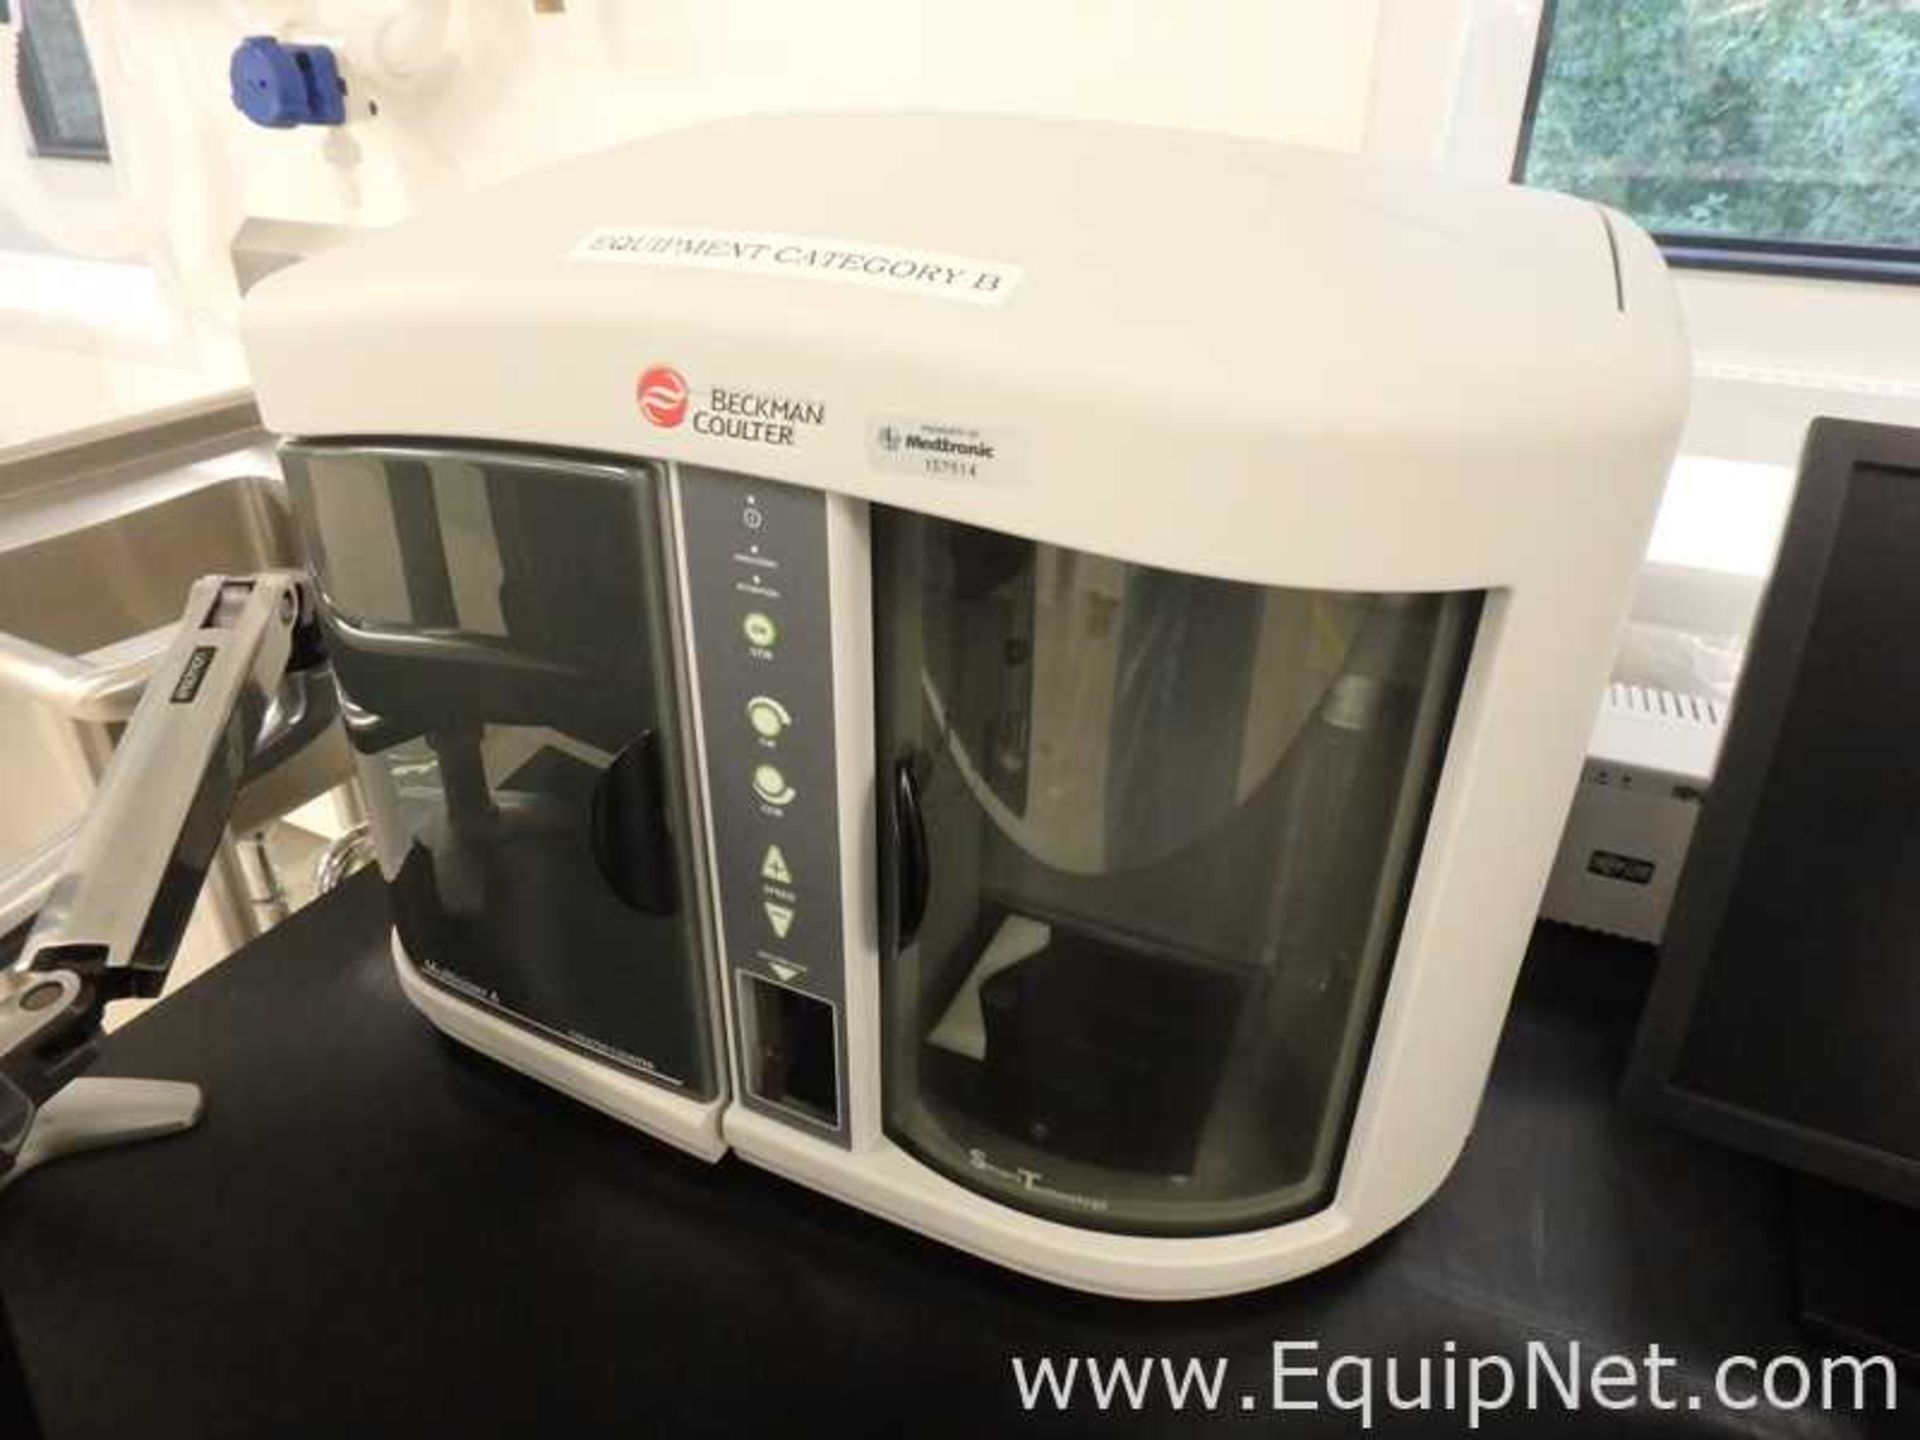 Beckman Coulter Multisizer 4 Particle Count and Size Analyzer - Image 2 of 8